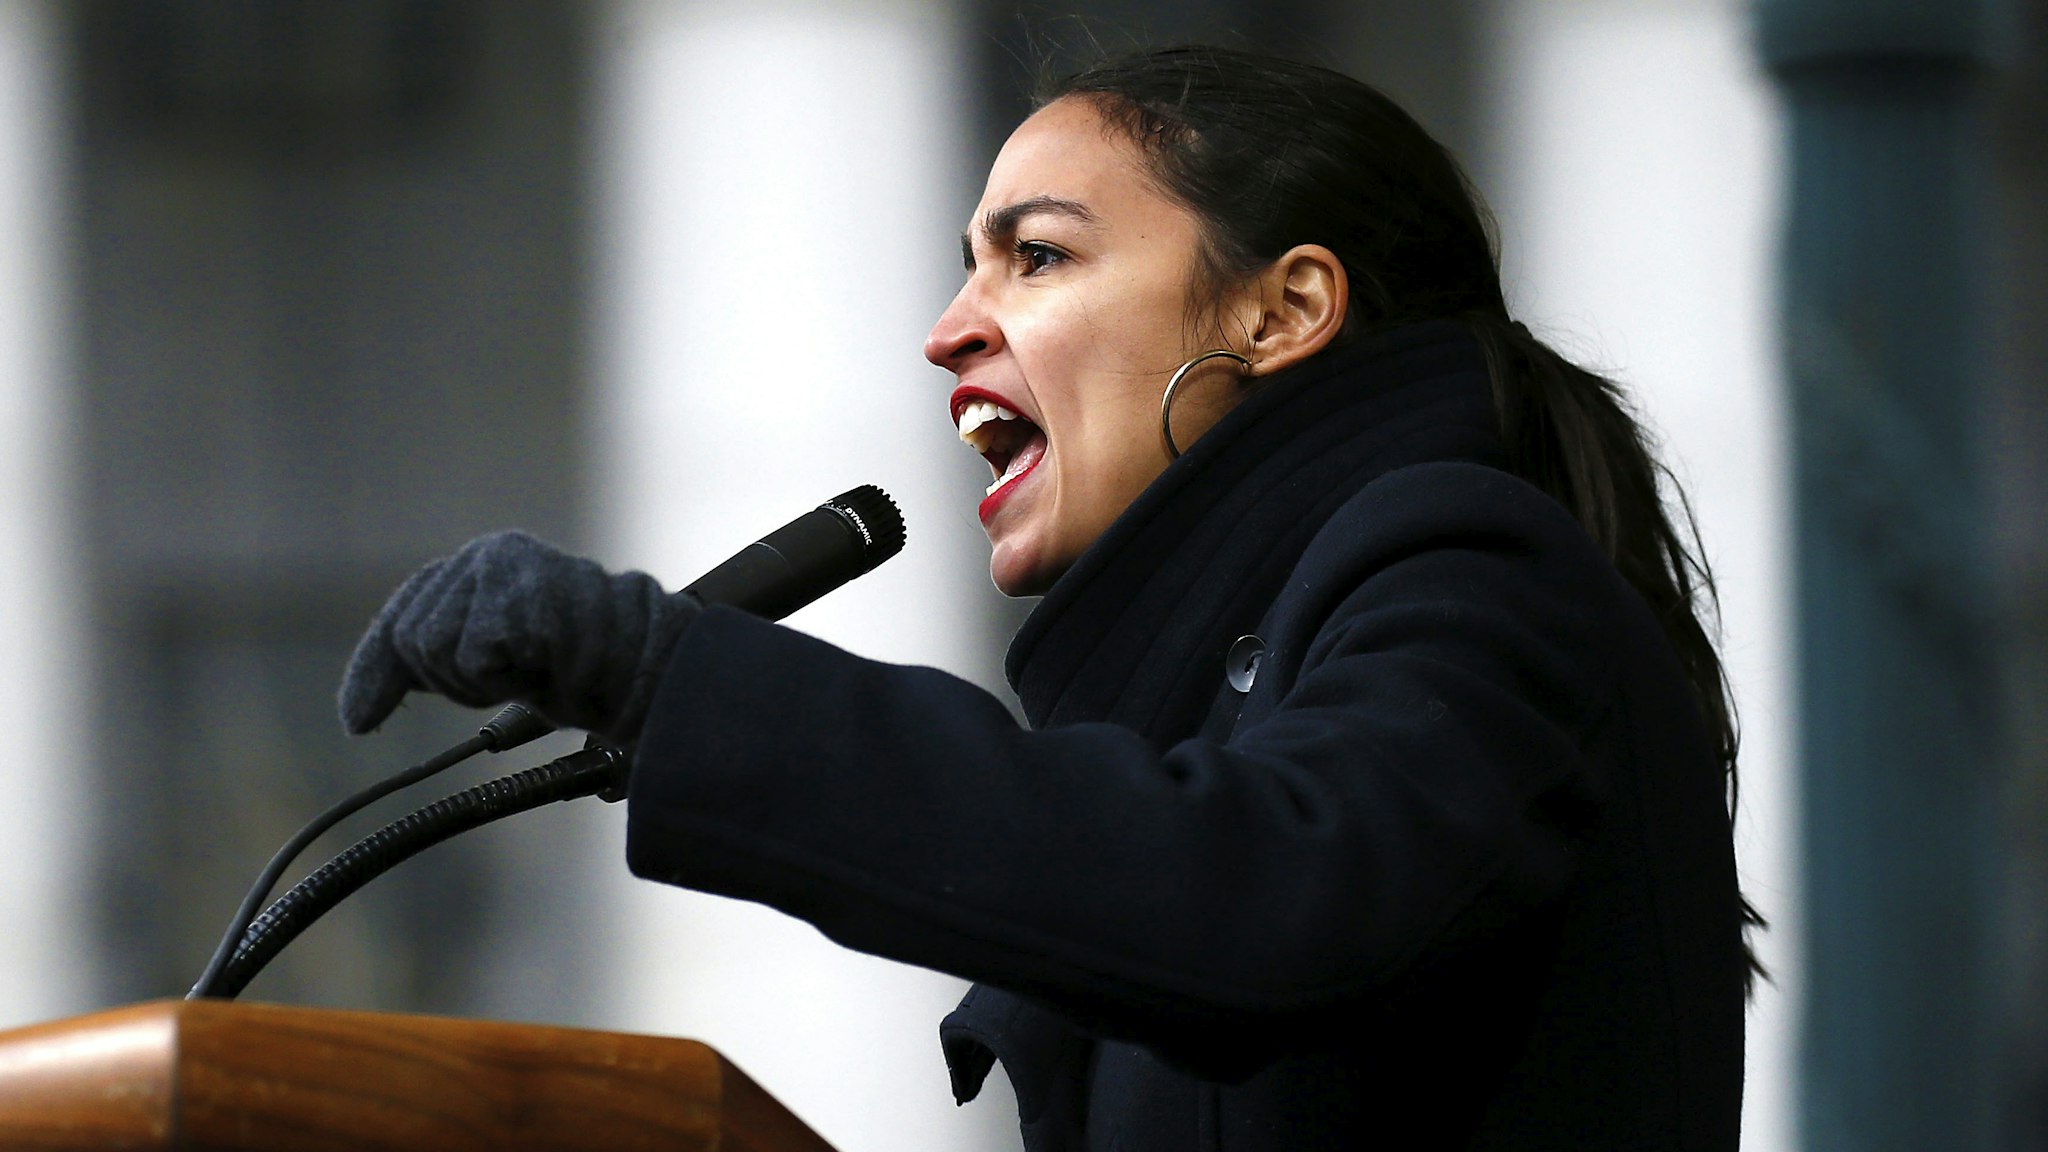 NEW YORK, NEW YORK - JANUARY 19: Member of the U.S. House of Representatives from New York's 14th district Alexandria Ocasio-Cortez attends Women's March 2019 on January 19, 2019 in New York City.